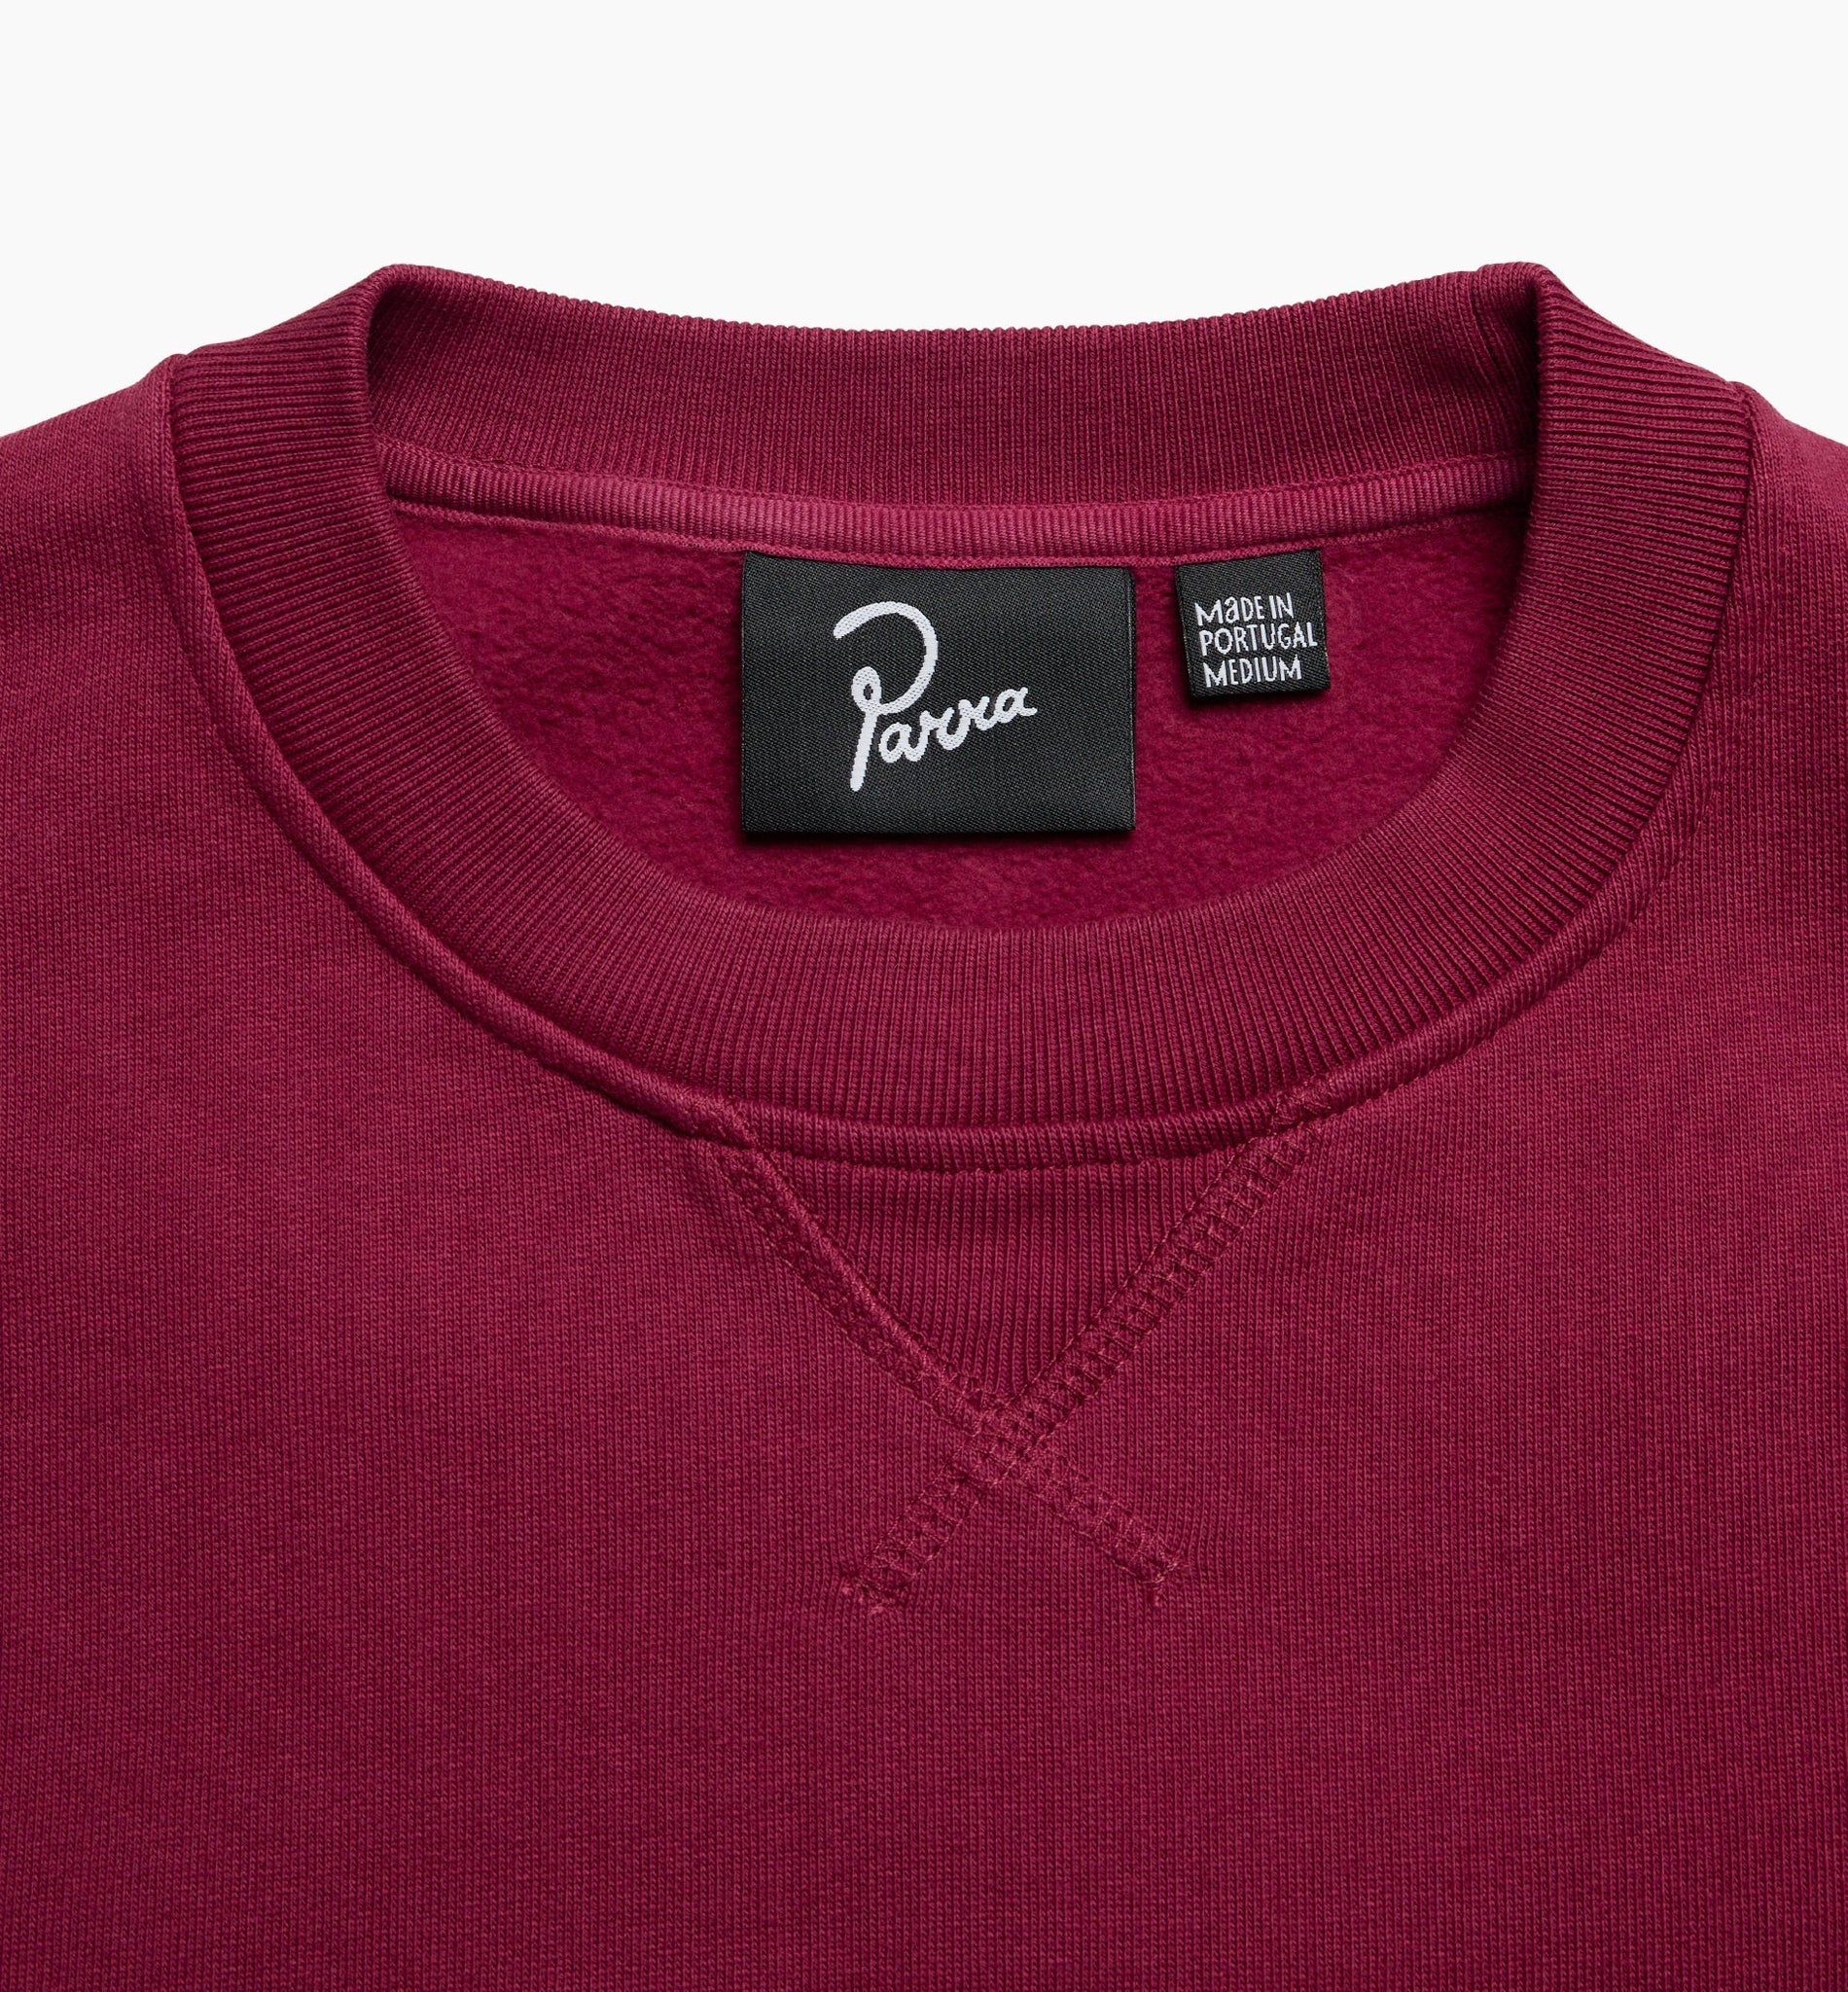 Snaked by a Horse Crew Neck Sweatshirt - Beet Red